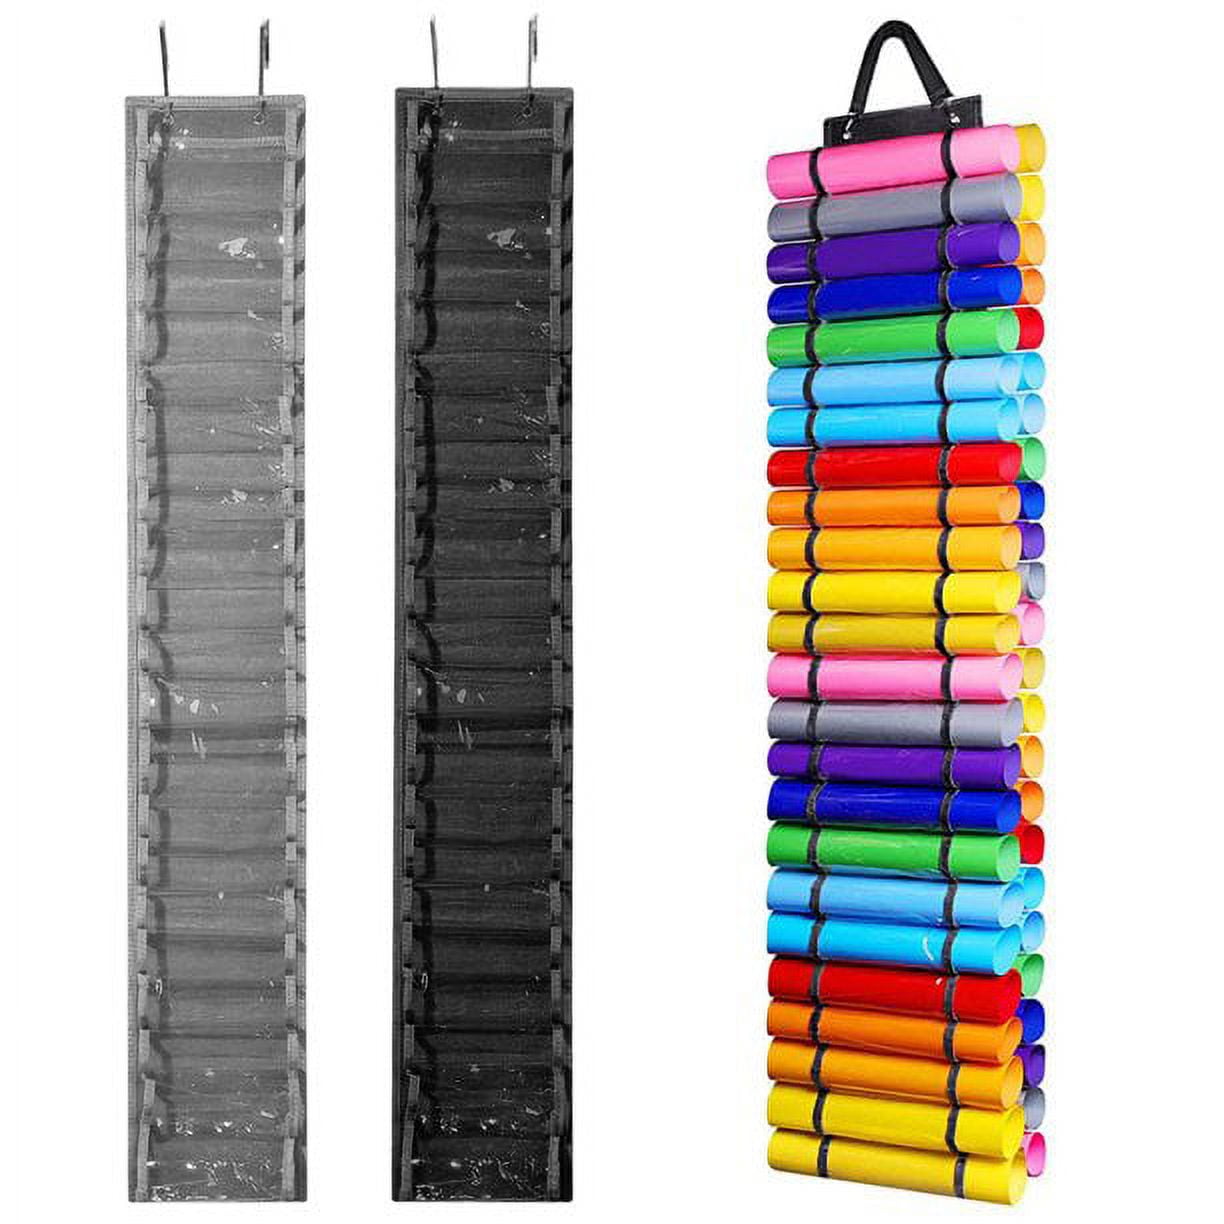 48 Compartments Vinyl Roll Storage Organizer For Wall Mount Hanging Closet  Over the Door Room Organizers